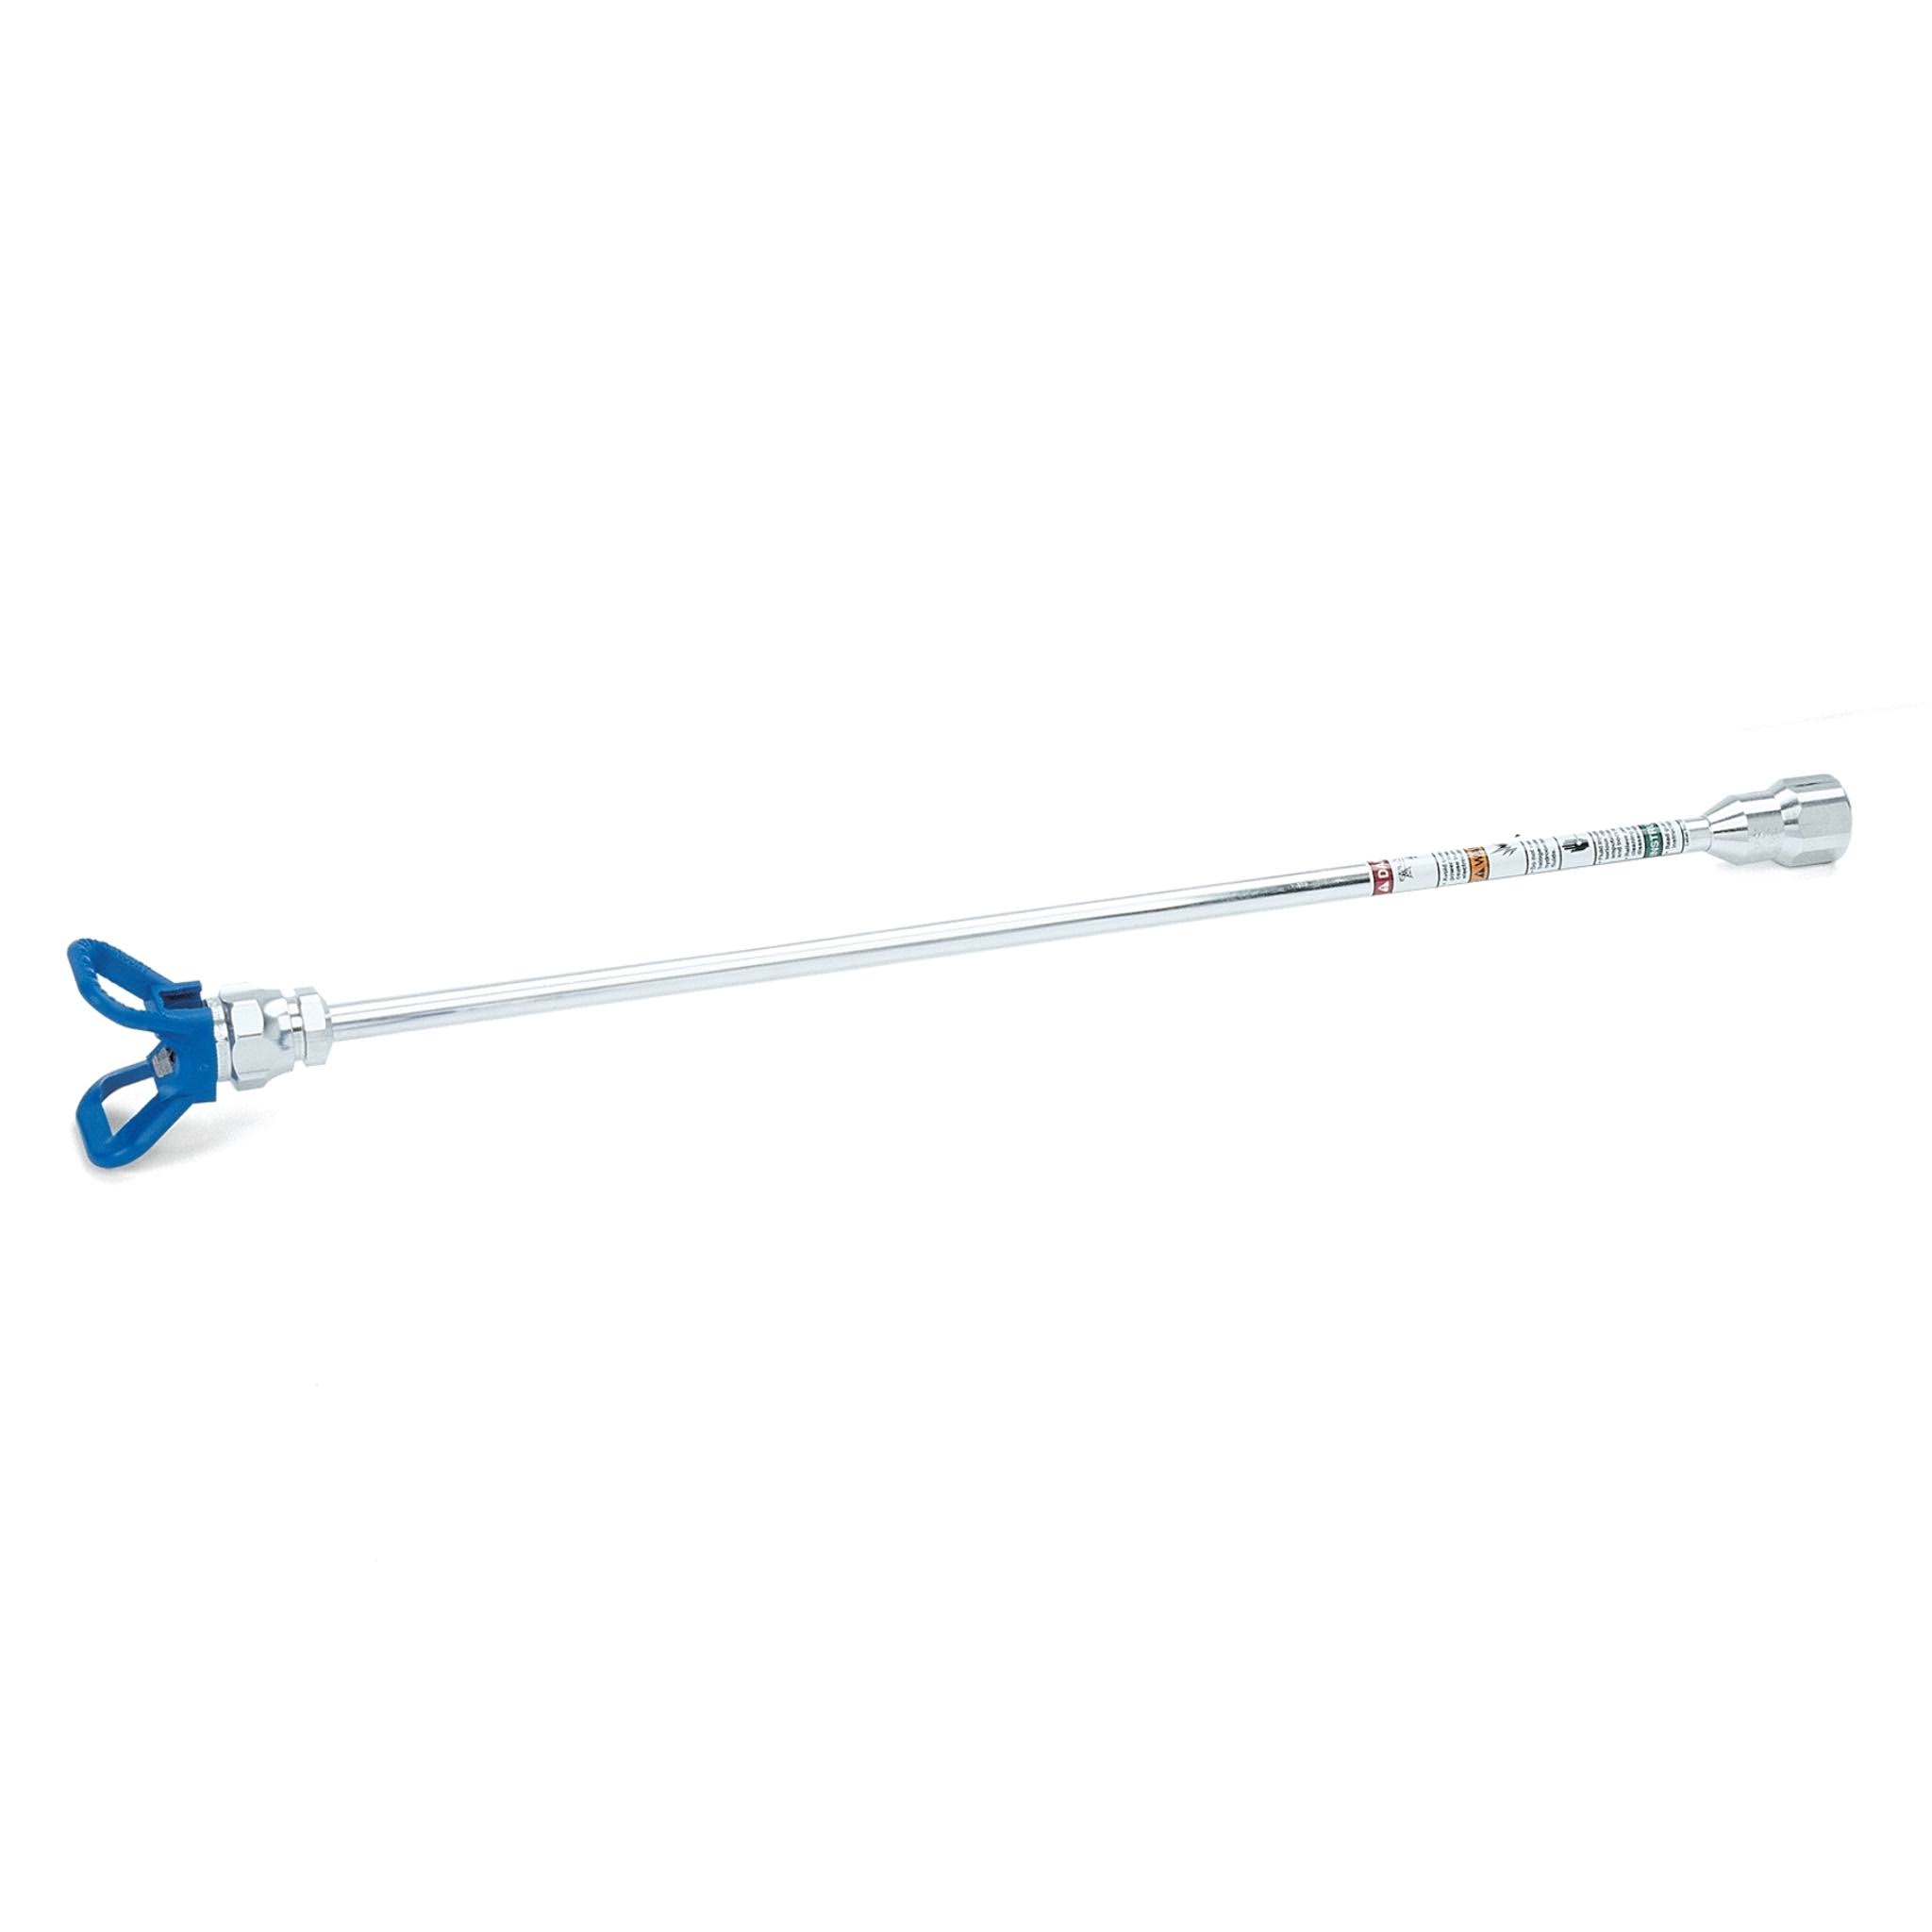 Graco 287021 Tip Extension Pole - with Rac X Handtite Guard, 20"